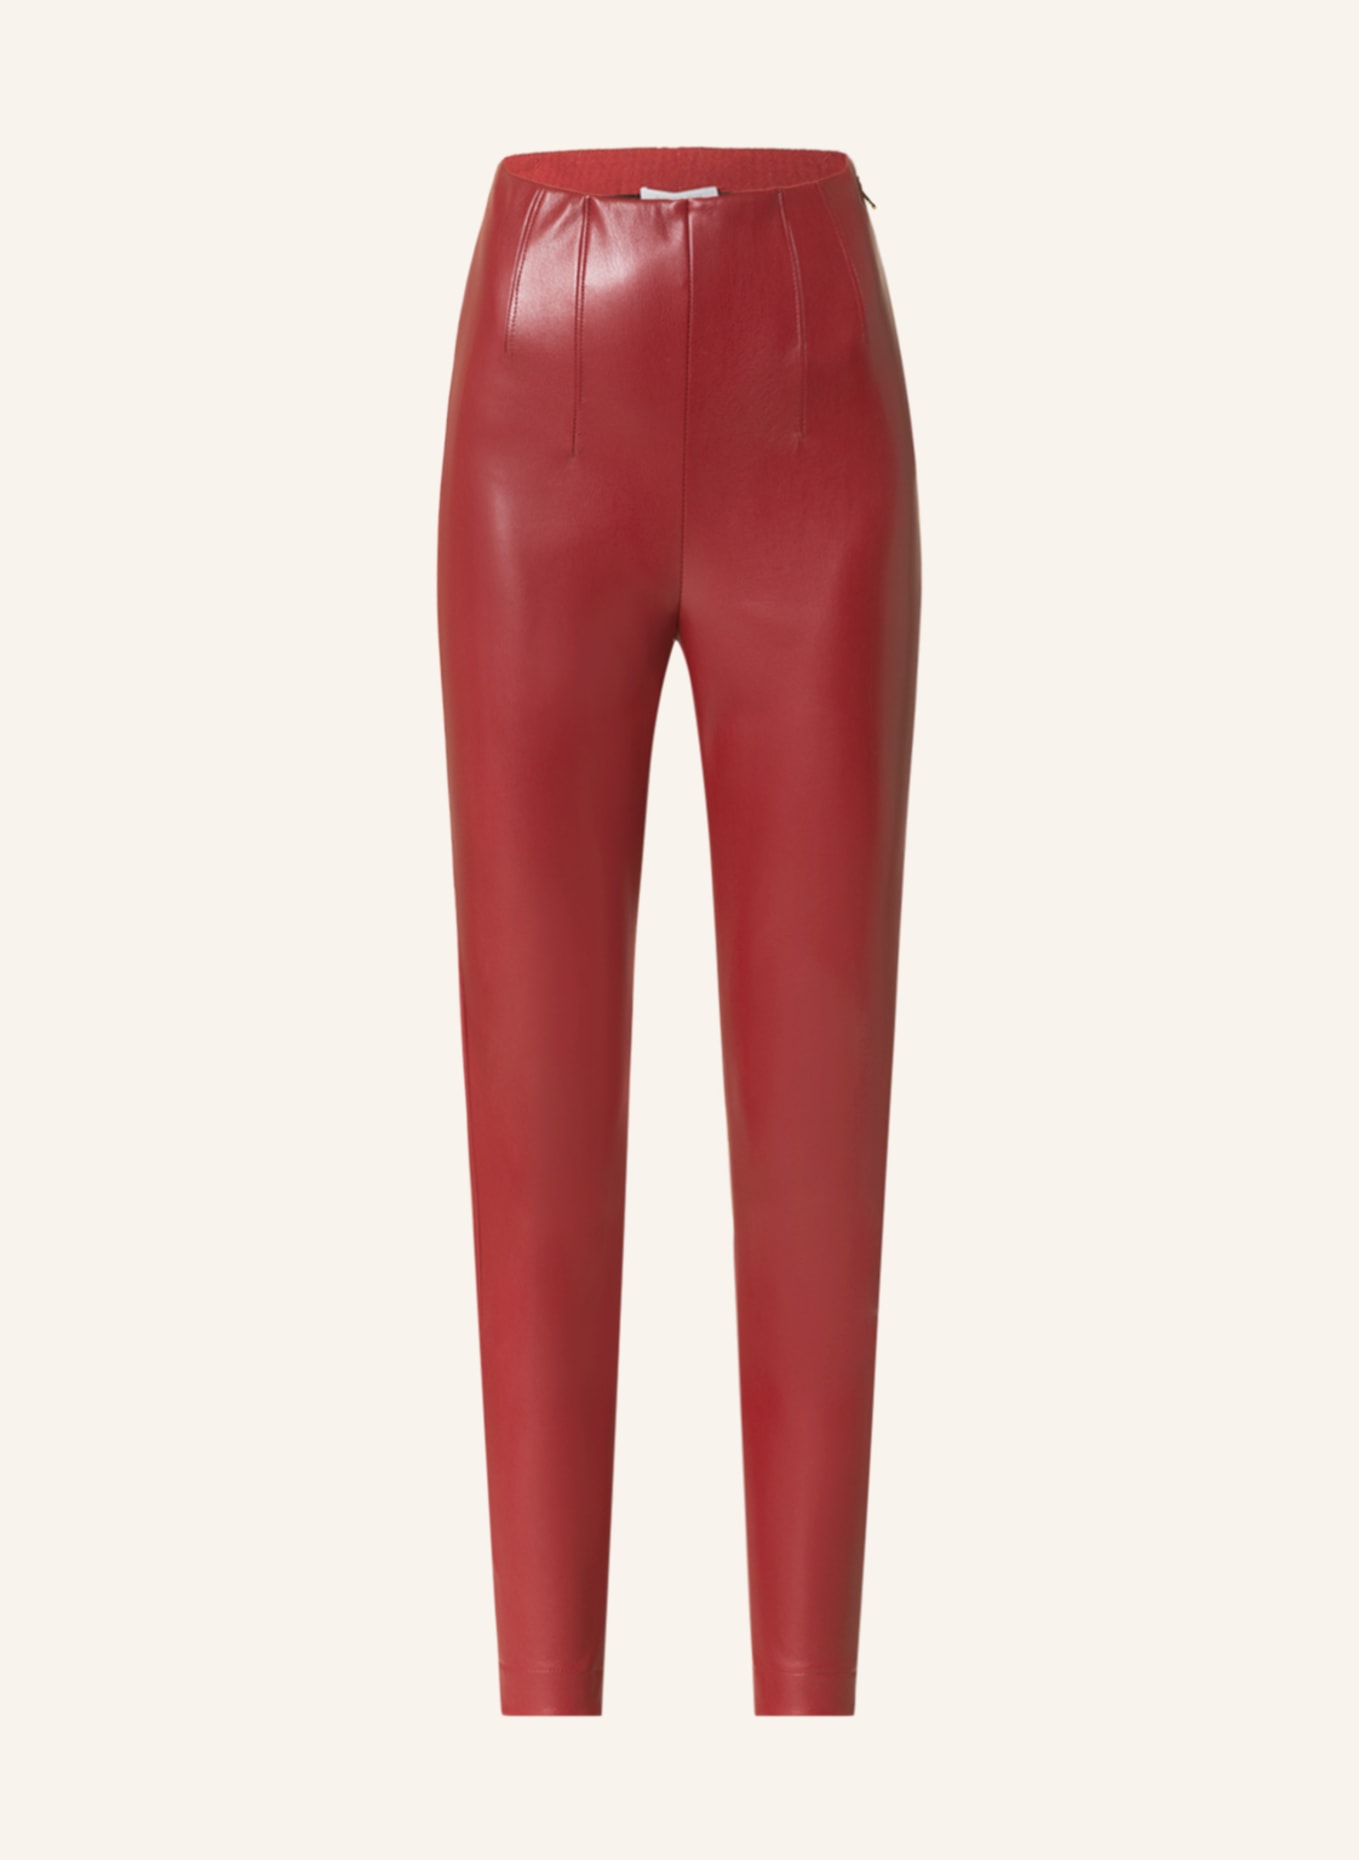 ASOS DESIGN crackle faux leather pants in red  part of a set  ASOS